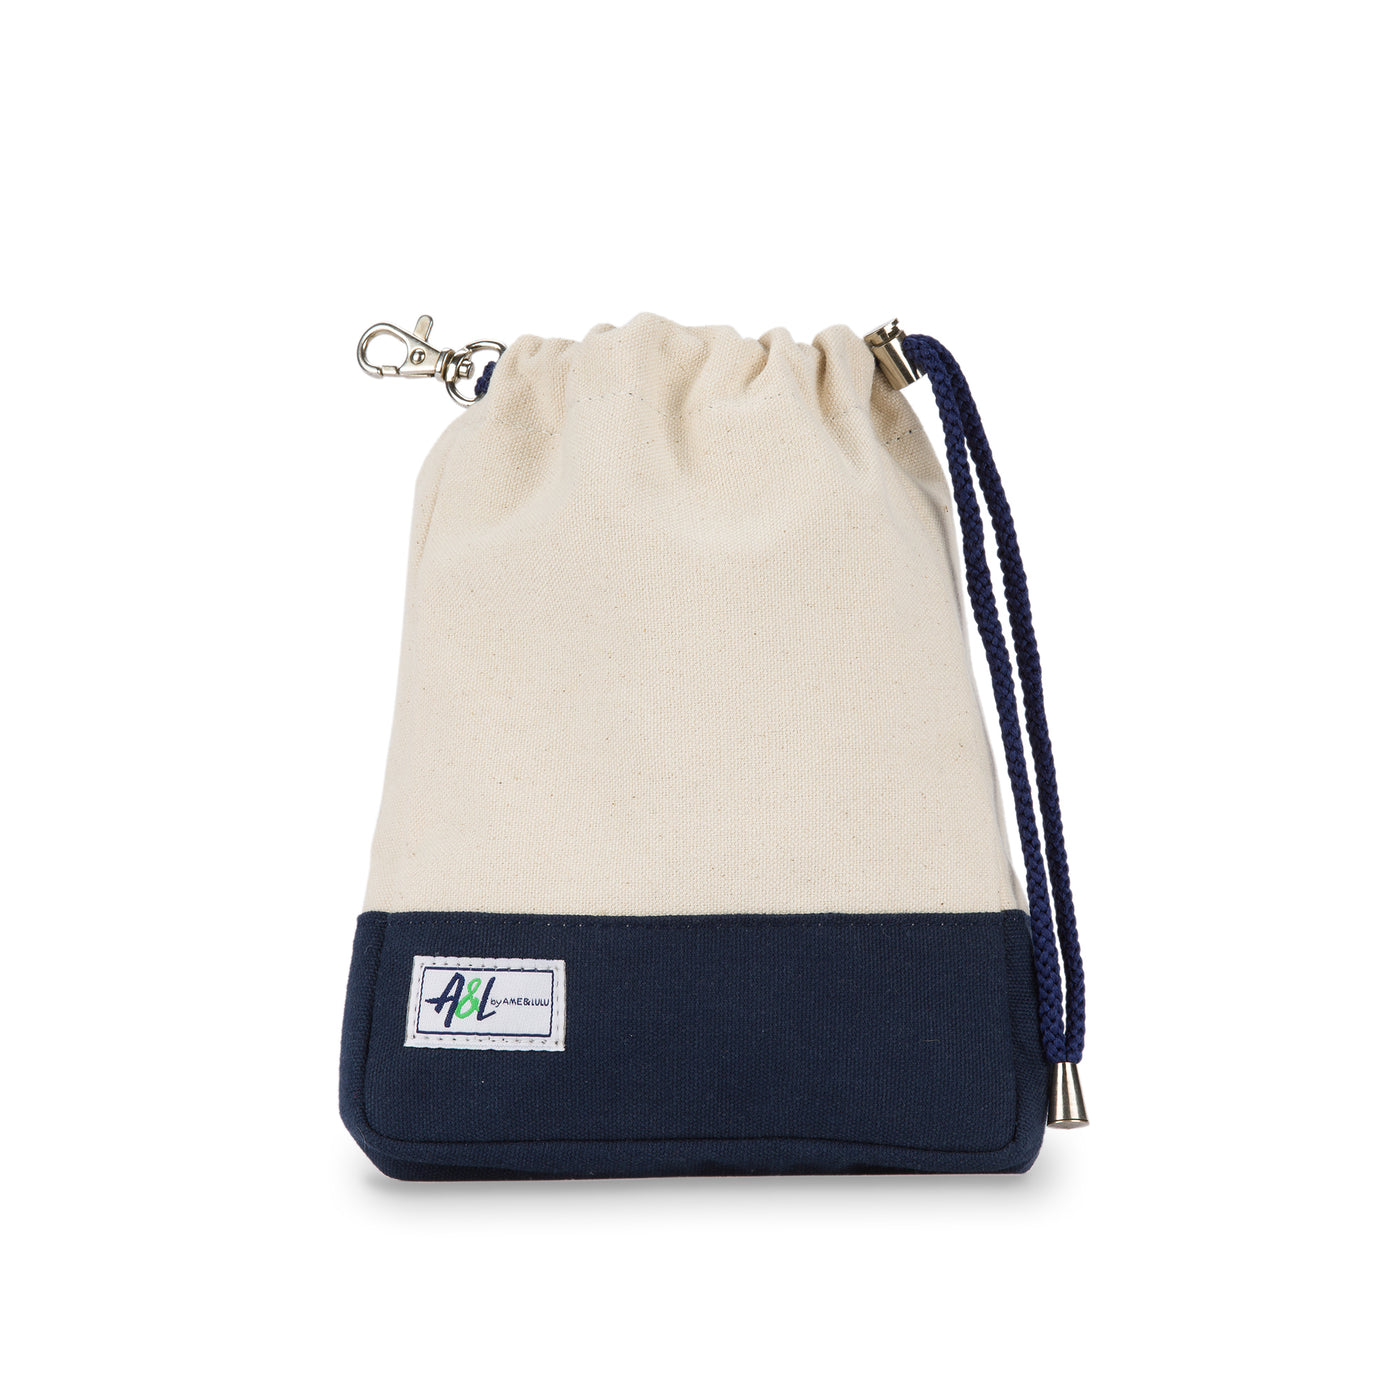 tan canvas small drawstring pouch with navy trim.